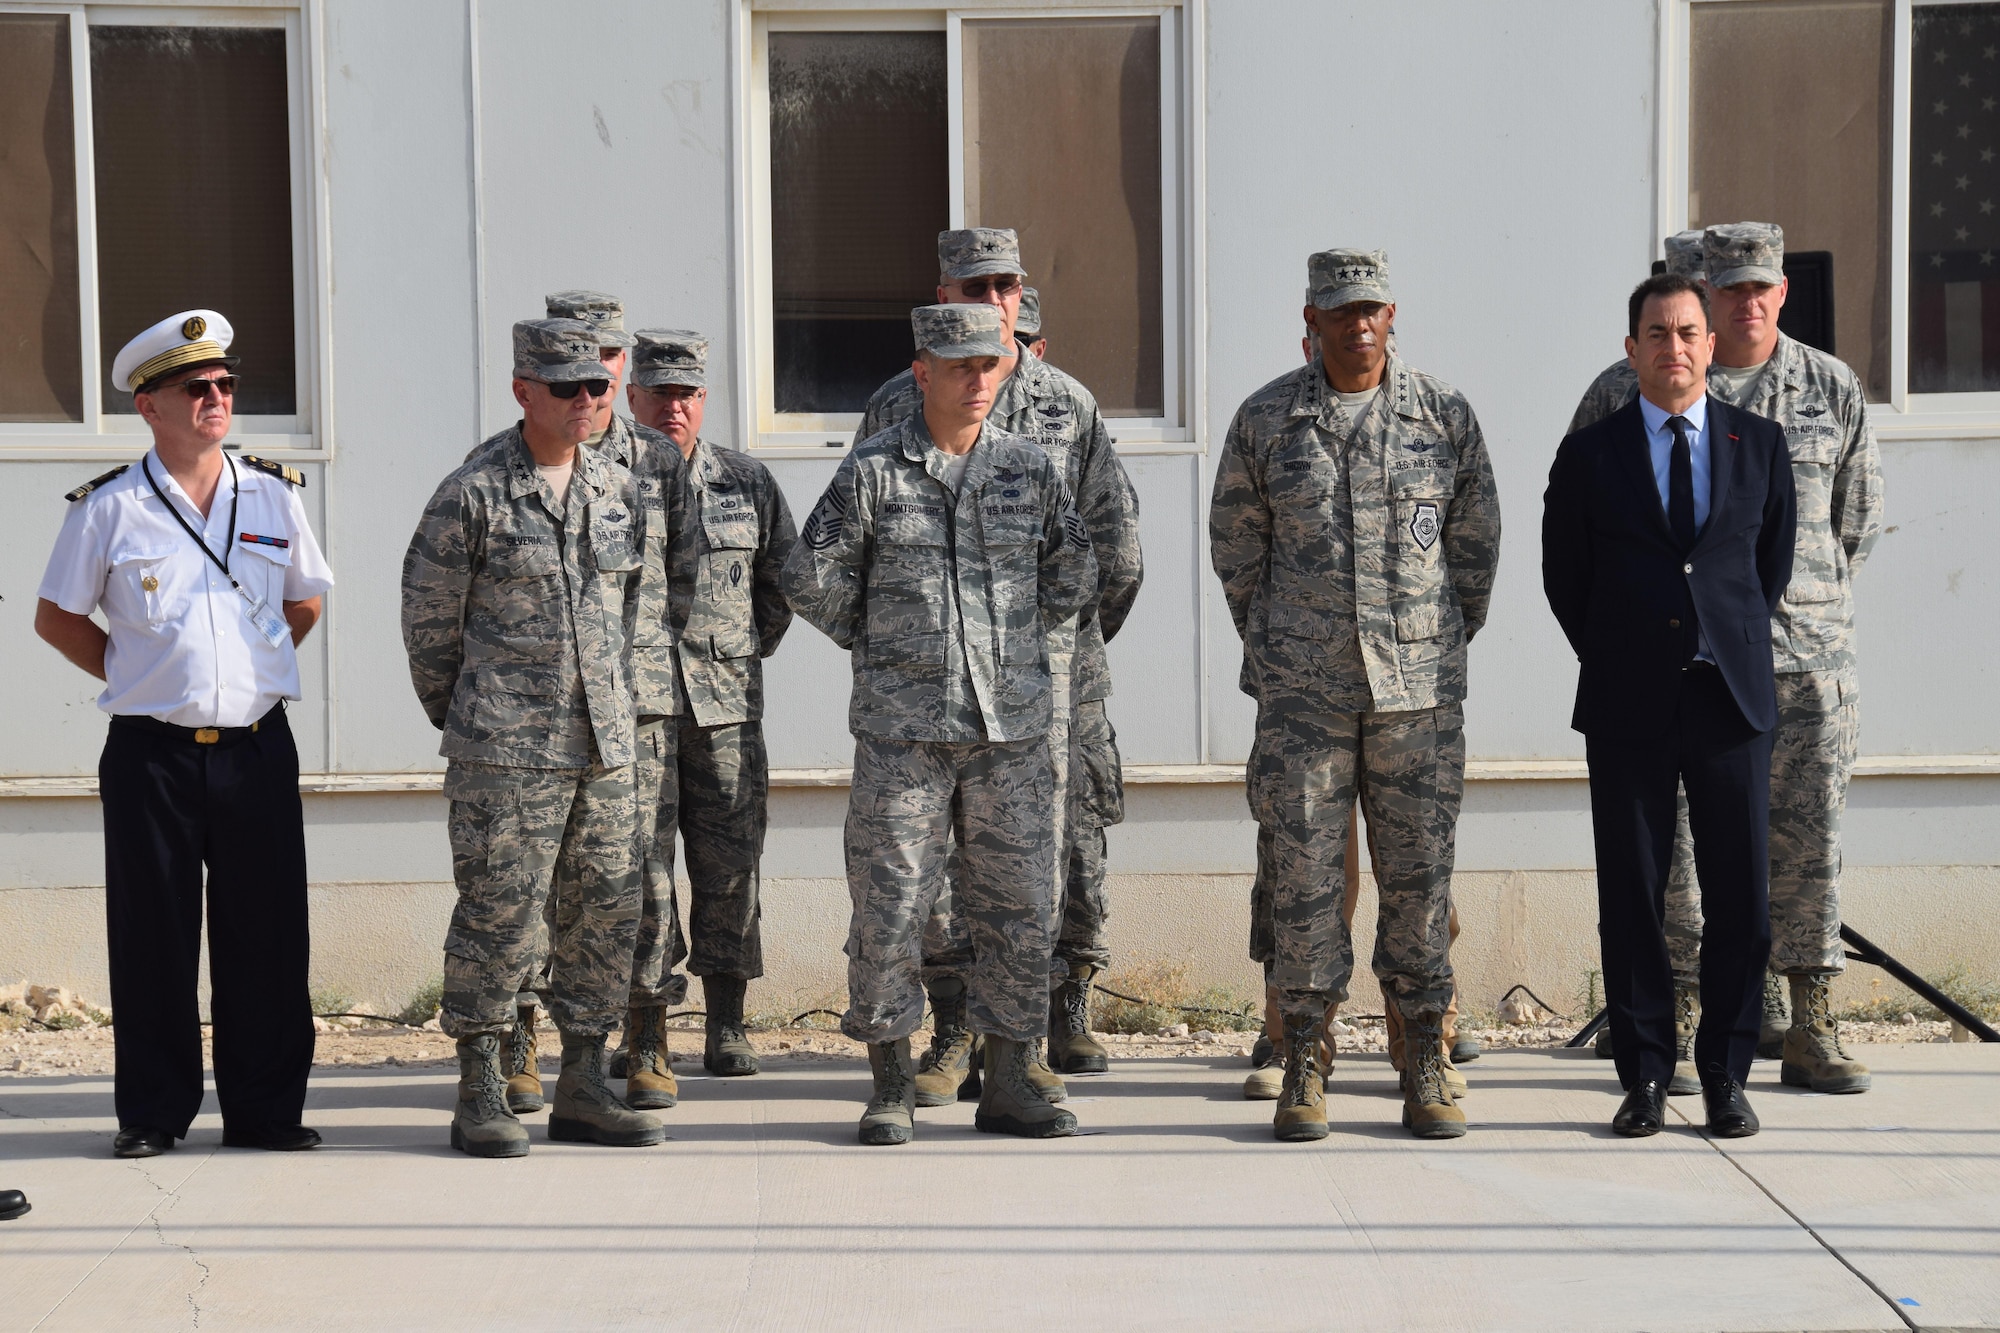 Coalition leaders stand at ease prior to the Bastille Day ceremony July 14, 2016, at Al Udeid Air Base, Qatar. Bastille Day celebrates Liberty, Equality and Fraternity in France. France is one of 20 nations supporting the air Coalition that provides decisive air and space power to combat Daesh and other terrorist organizations and ensure the stability of the Southwest Asia region. (U.S. Air Force photo/Technical Sgt. Carlos J. Treviño/Released)